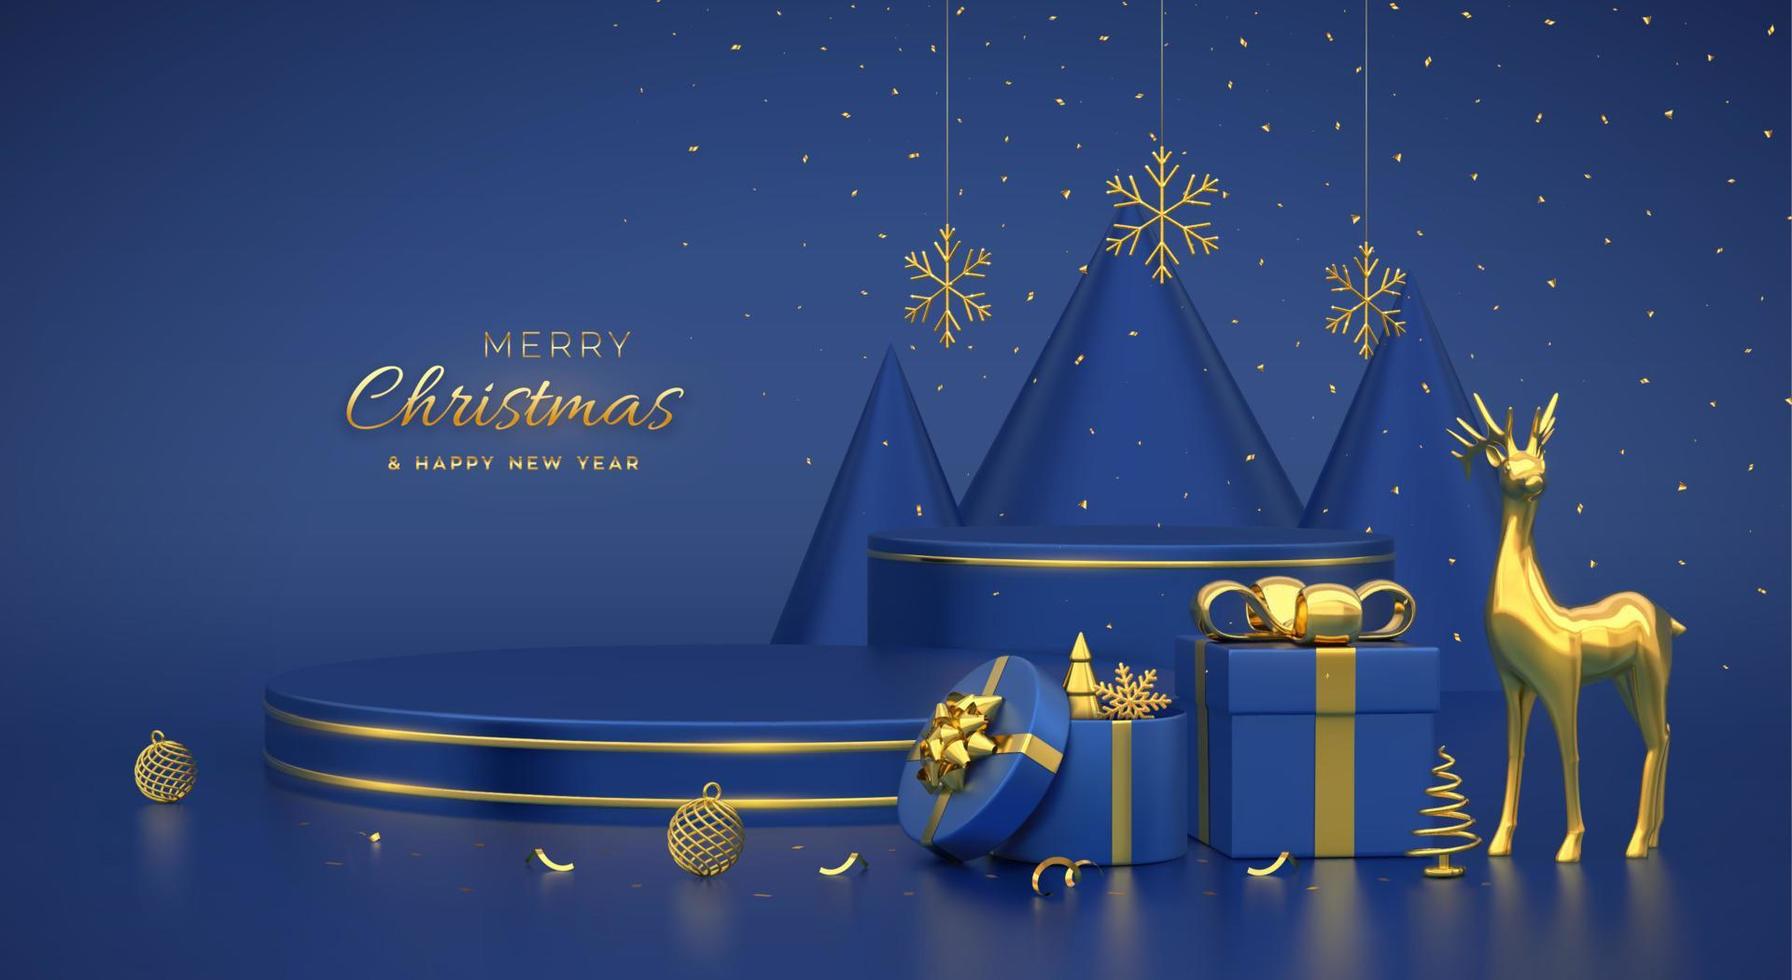 Christmas Scene and 3D platforms with gold circle on blue background. Blank Pedestal with deer, snowflakes, balls, gift boxes, golden metallic cone shape pine, spruce trees. Vector illustration.